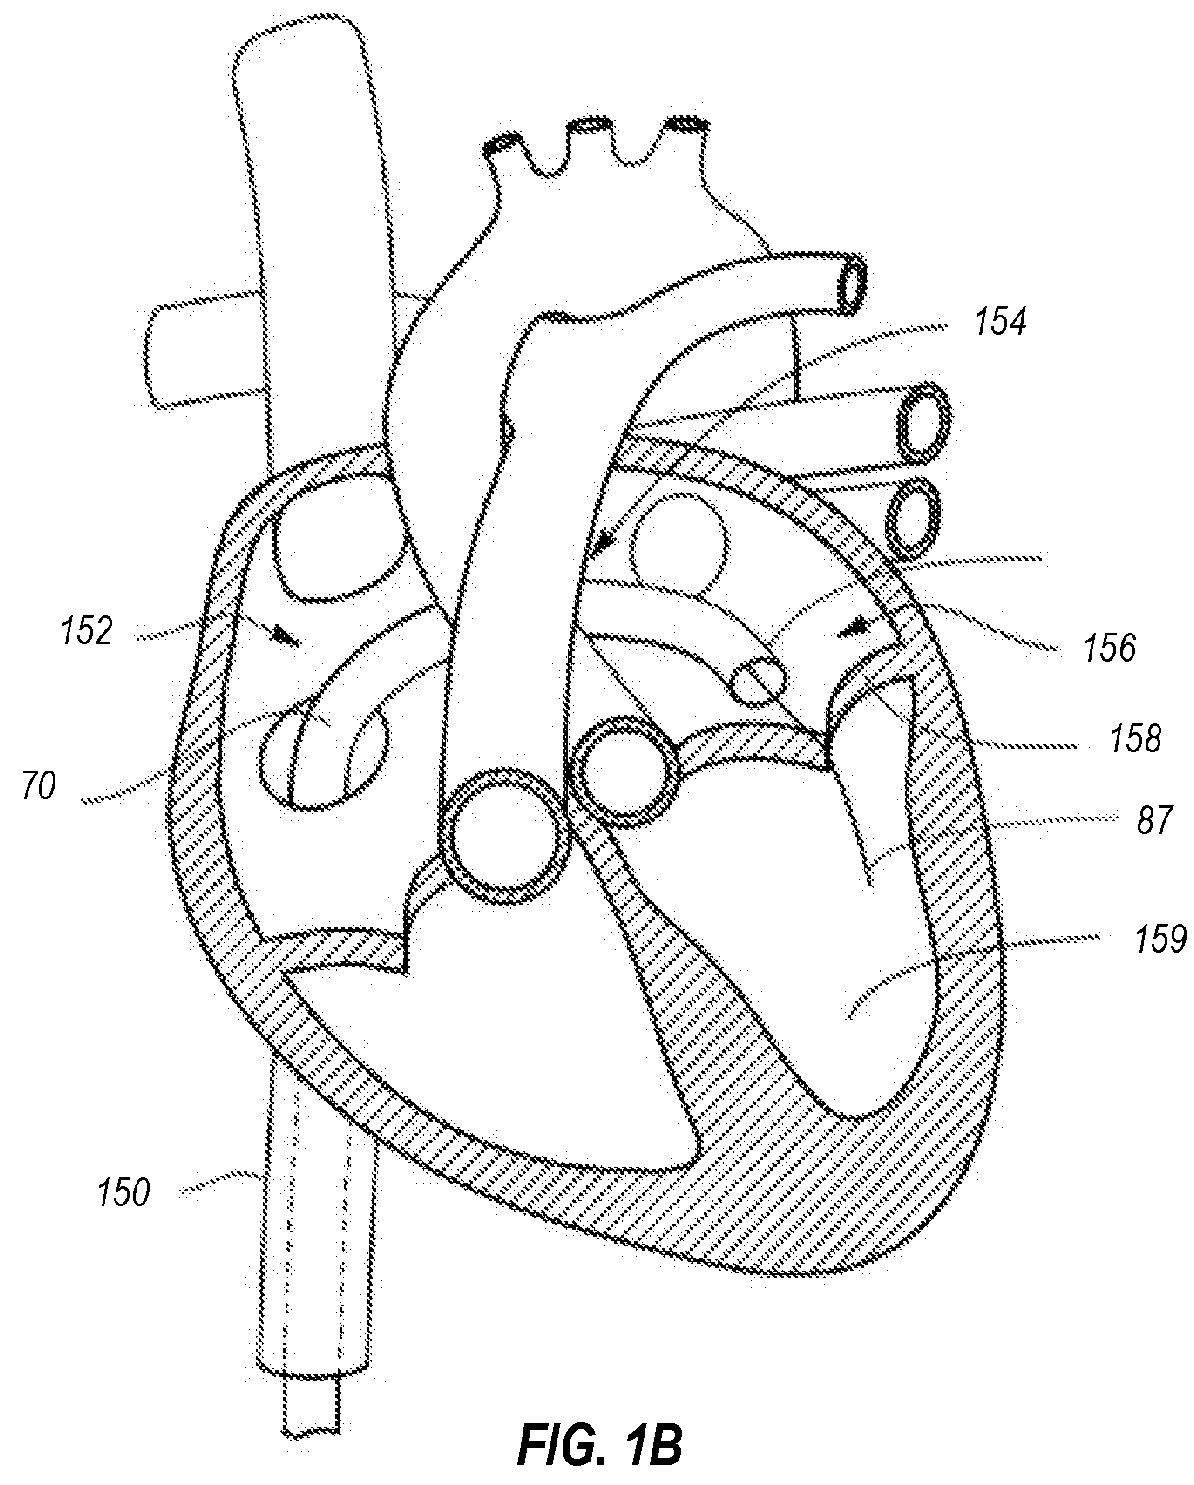 Systems and methods for delivering and deploying an artificial heart valve within the mitral annulus